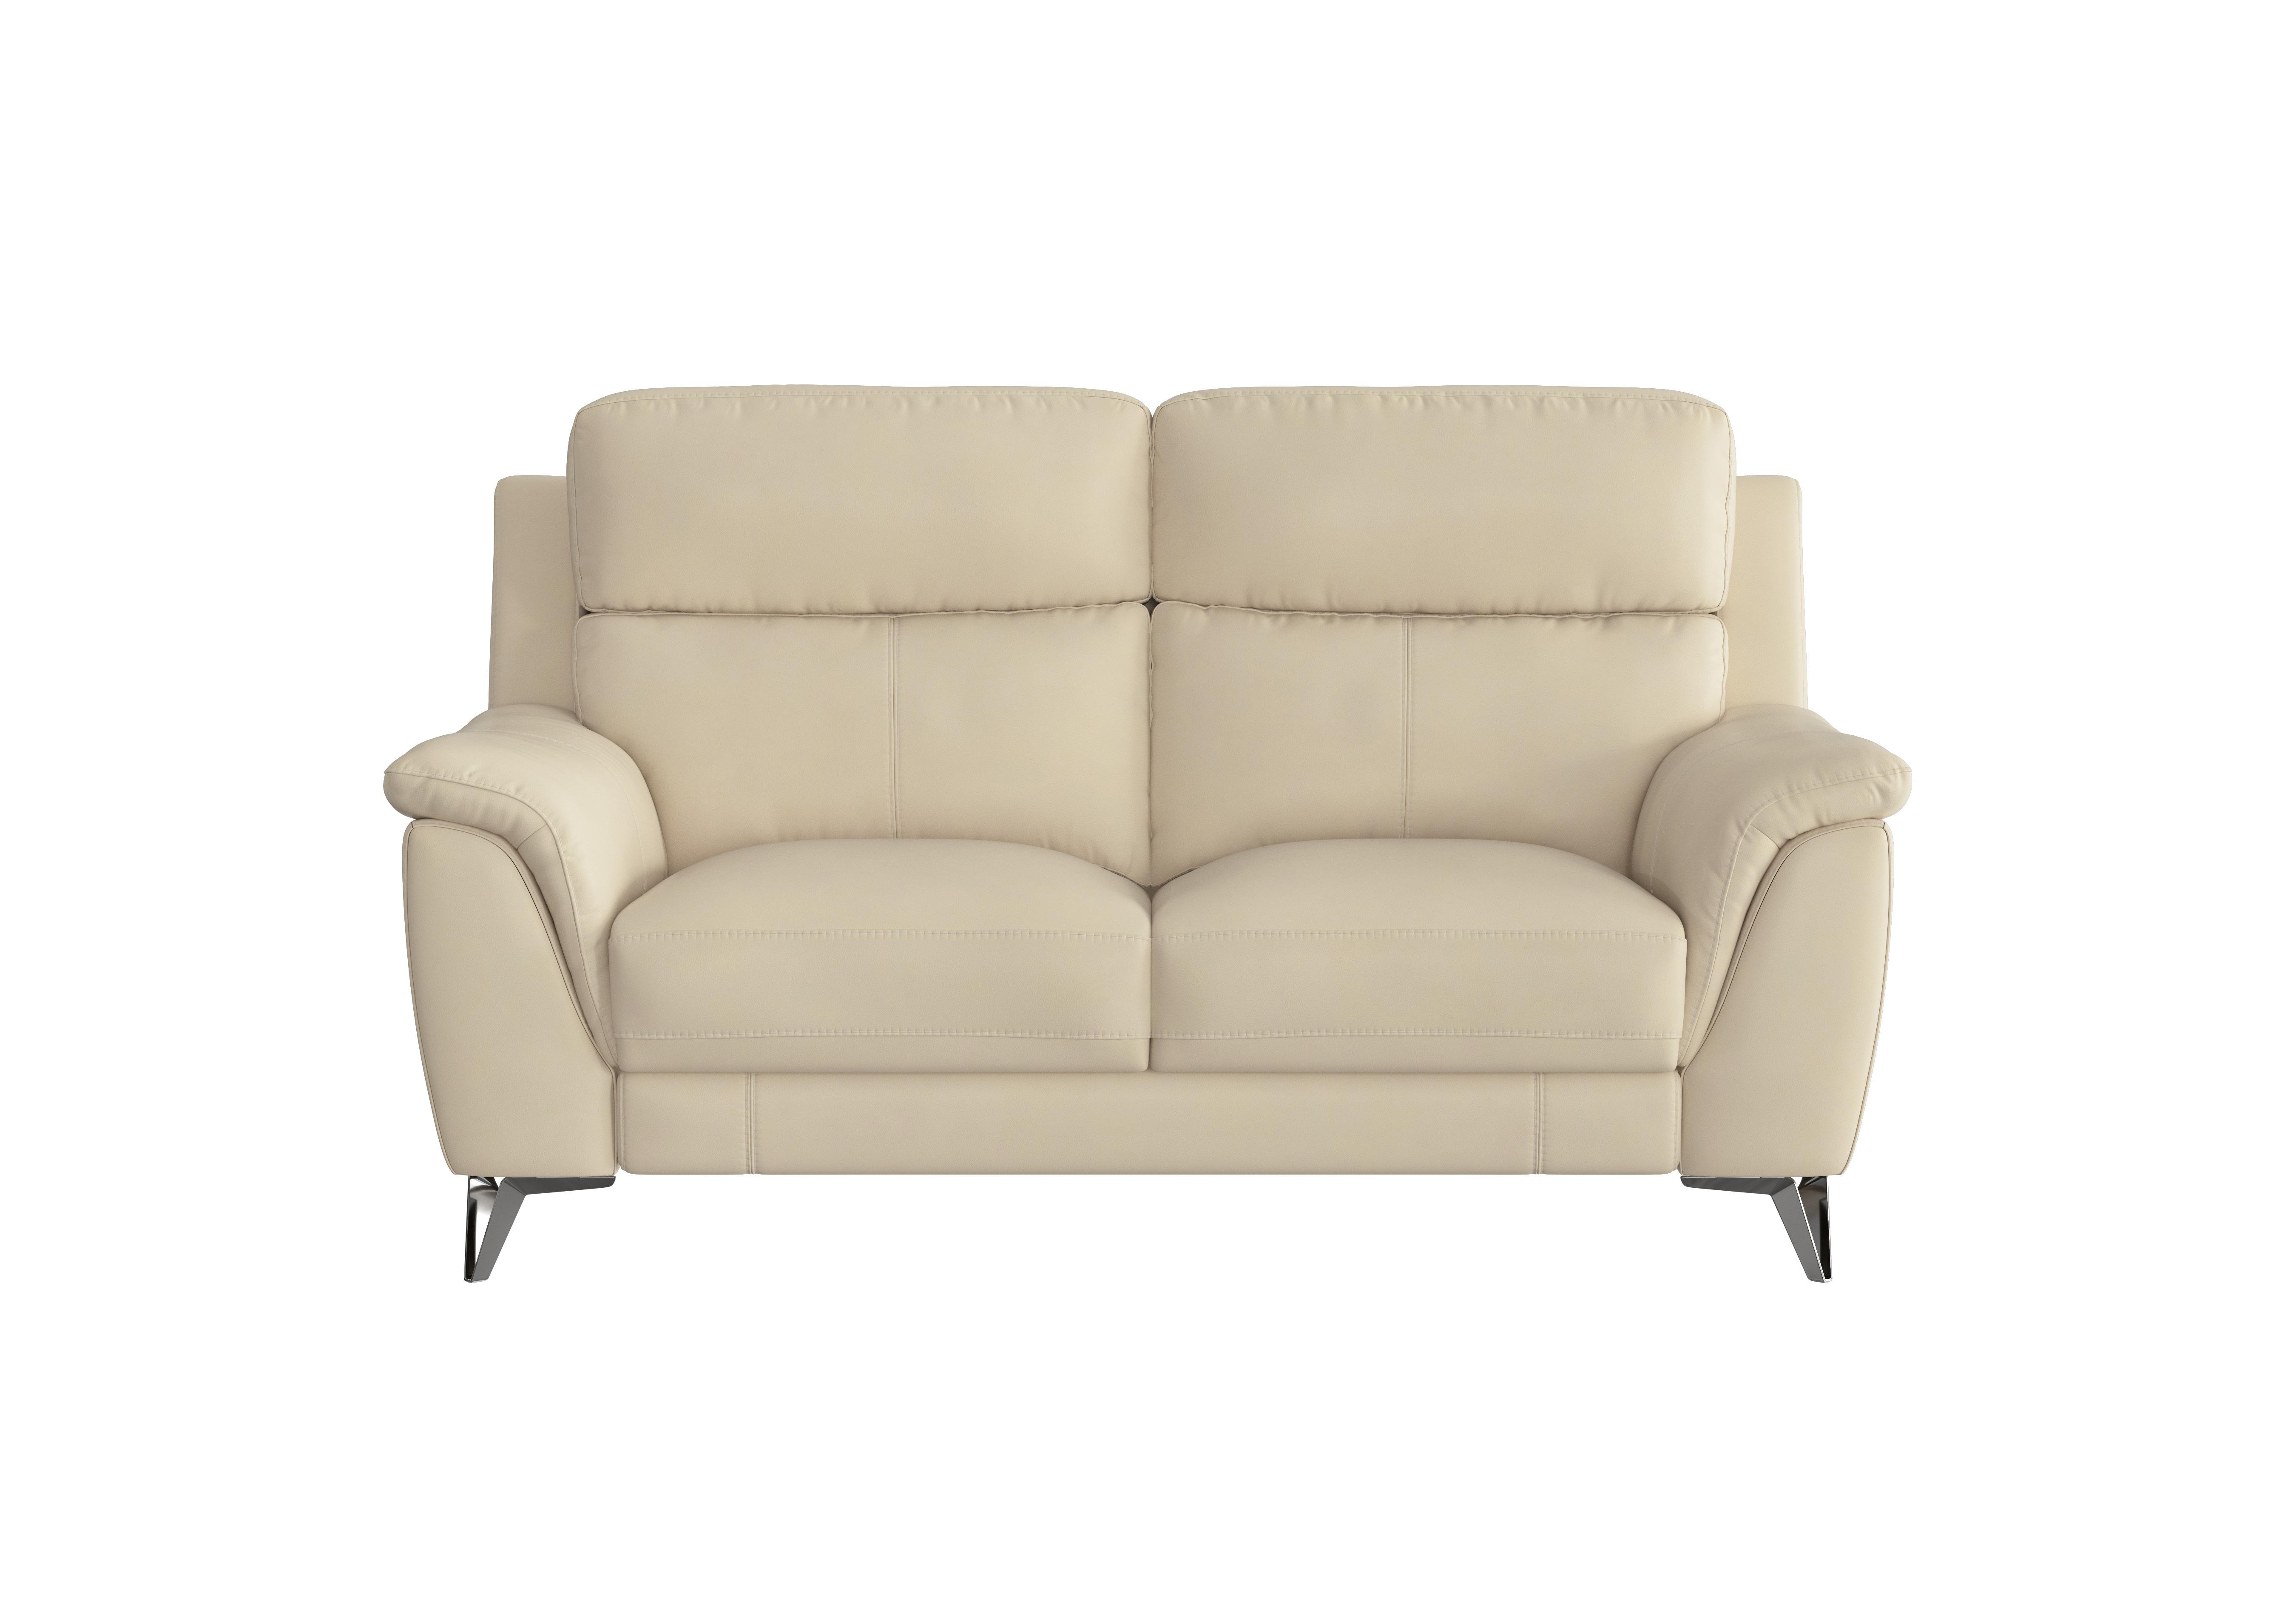 Contempo 2 Seater Leather Sofa in Bv-862c Bisque on Furniture Village